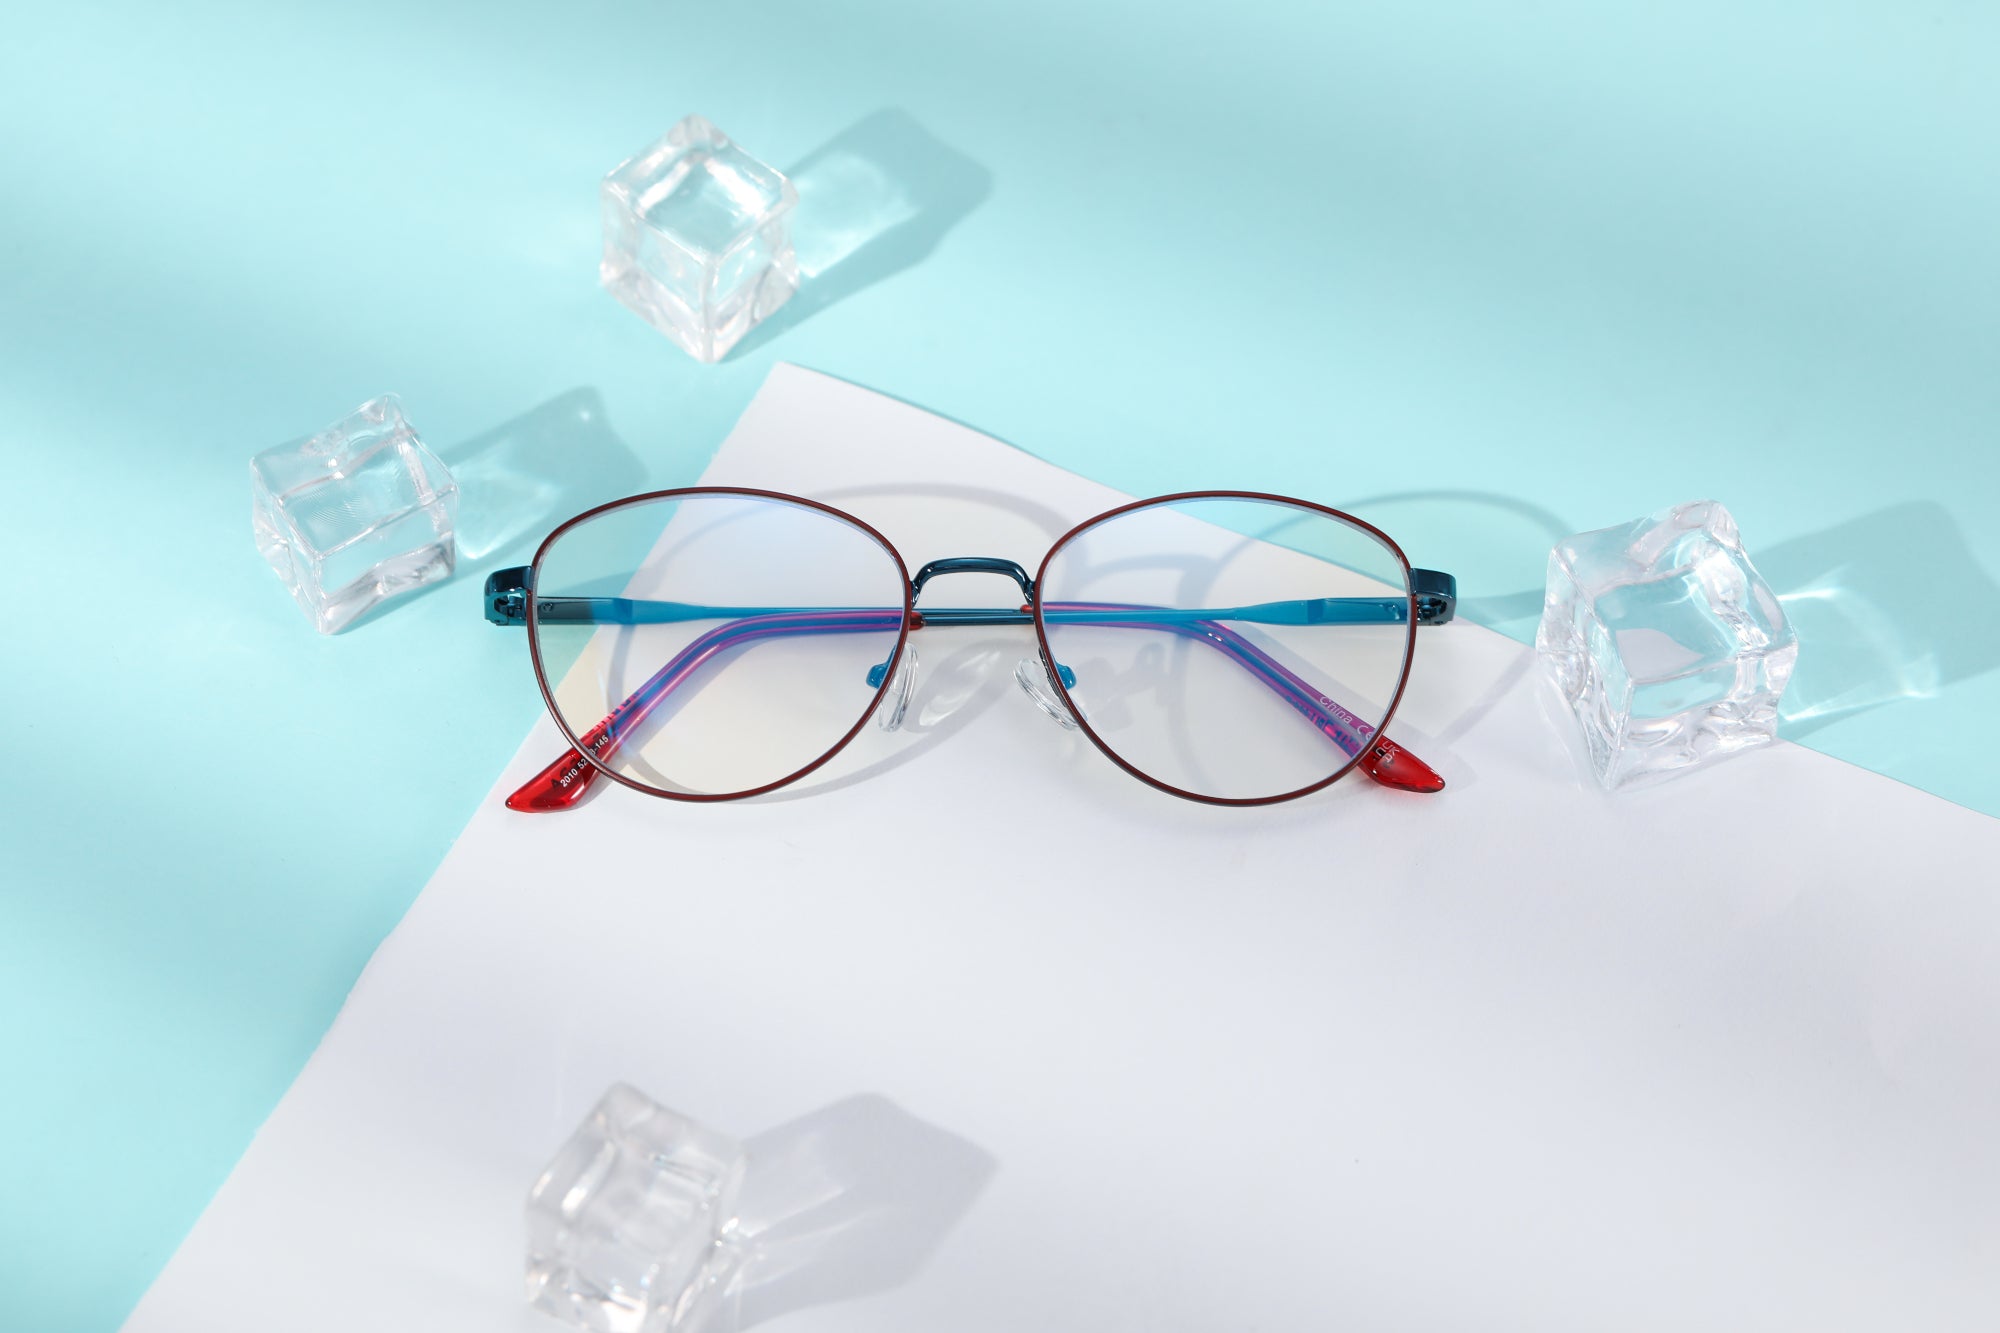 Glasses: Anti-Blue Light - Odyssey Collection